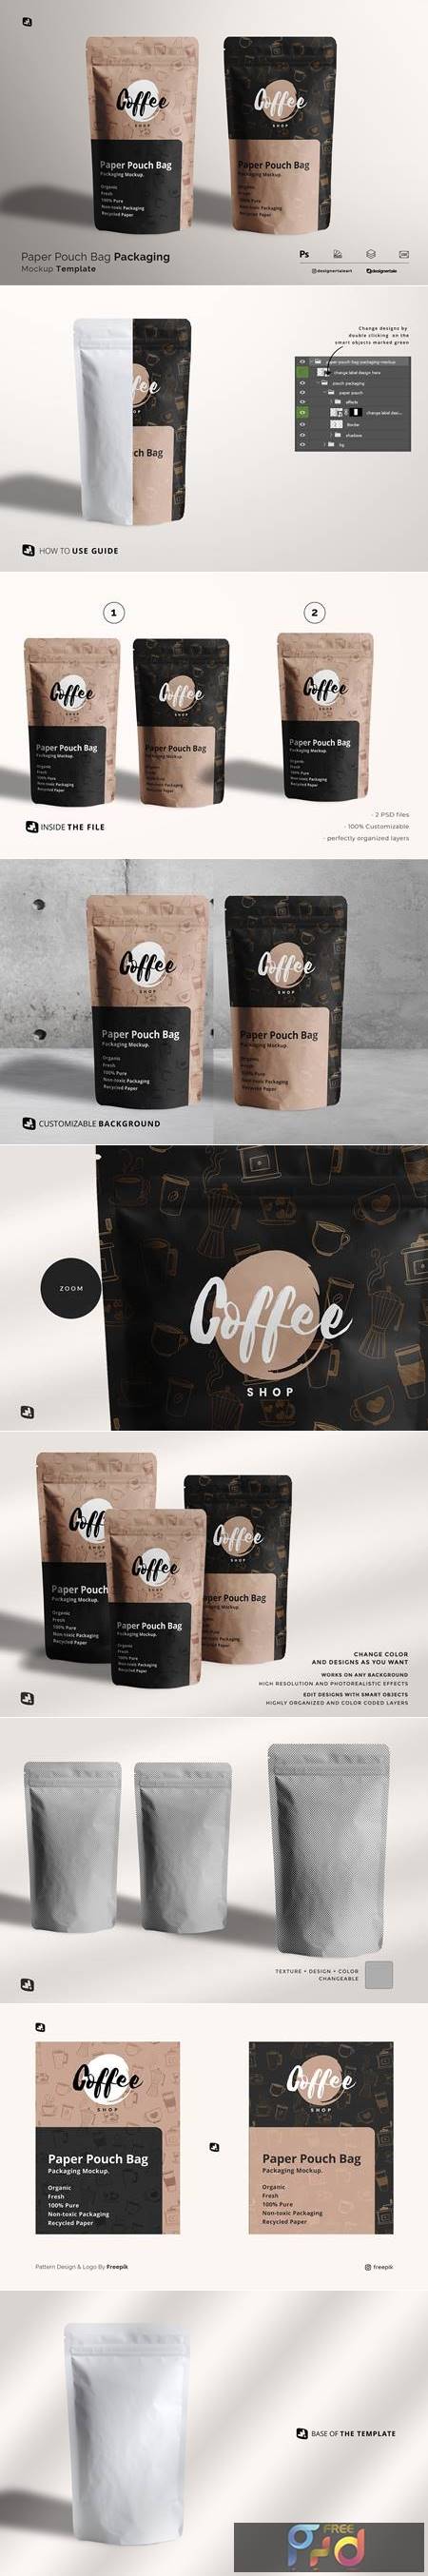 Paper Pouch Bag Packaging Mockup 6504939 1